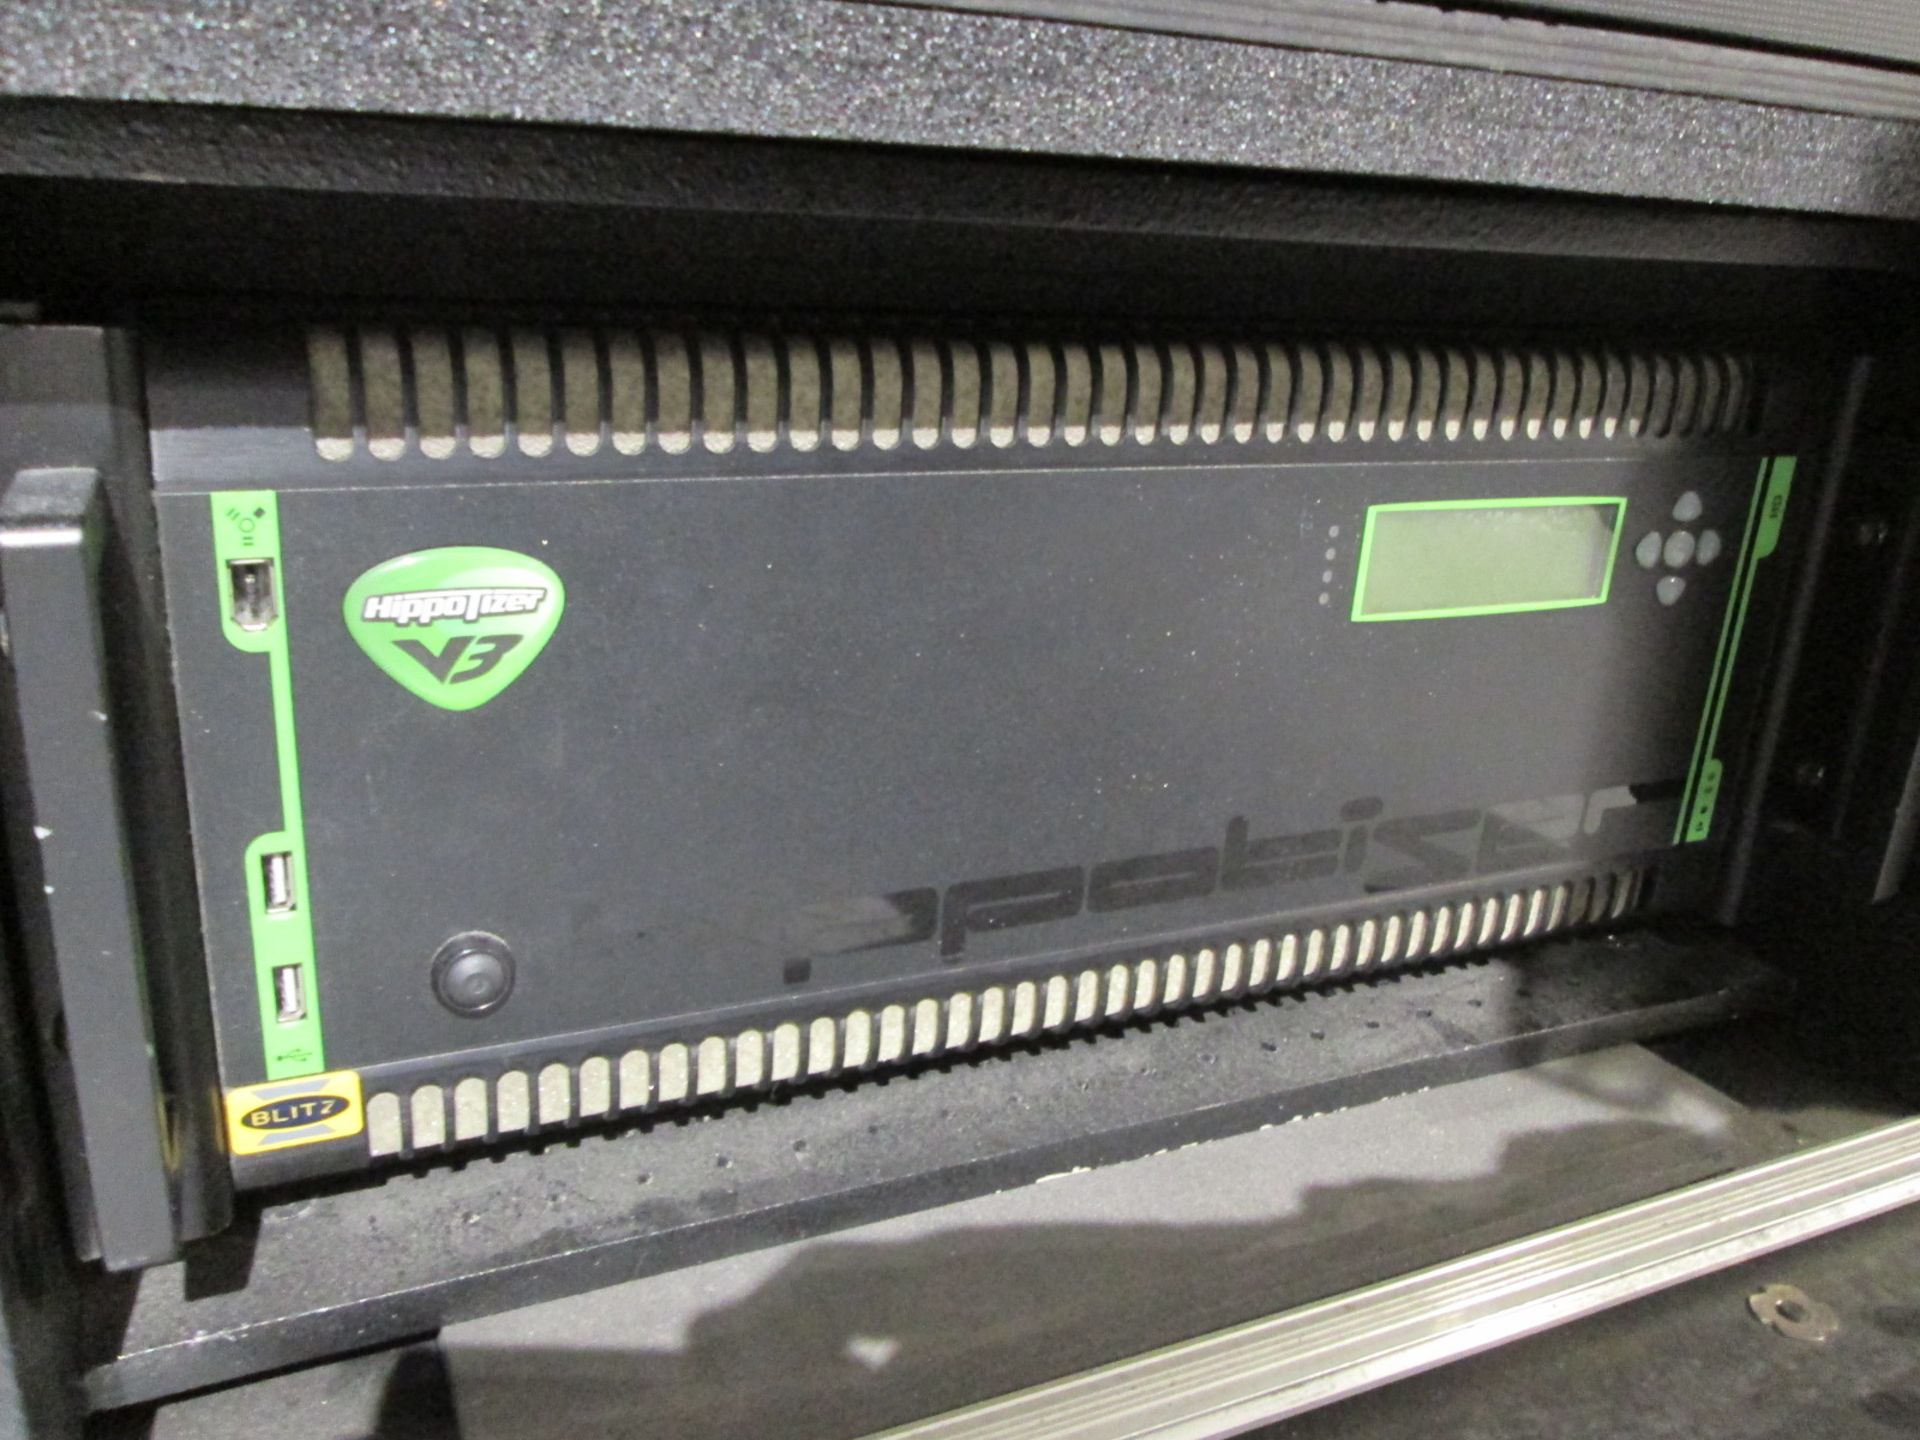 Green Hippo V5 Hippotiser Media Graphics Server with fader remote panel. S/N 2200. In flight case - Image 3 of 9